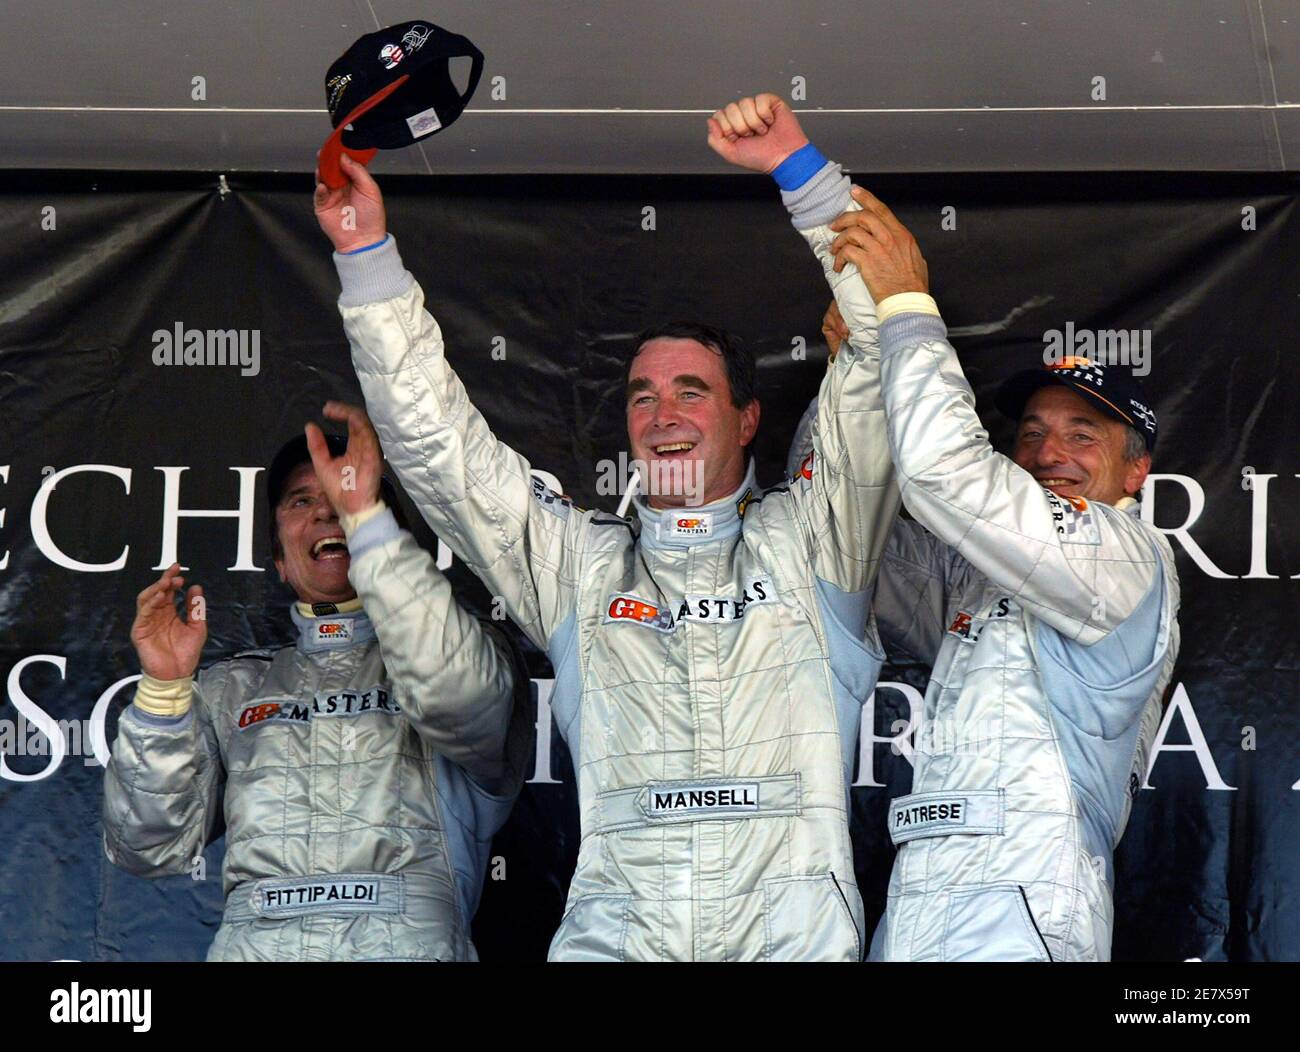 Briton Nigel Mansell (C), Brazil's Emerson Fittipaldi (L) and Italy's Ricardo Patrese celebrate after the Grand Prix Masters race at the Kyalami circuit near Johannesburg November 13, 2005. Mansell, 52, led the 30-lap race from start to finish and held off the challenge of Fittipaldi to win by less than half-a-second. REUTERS/Juda Ngwenya Stock Photo